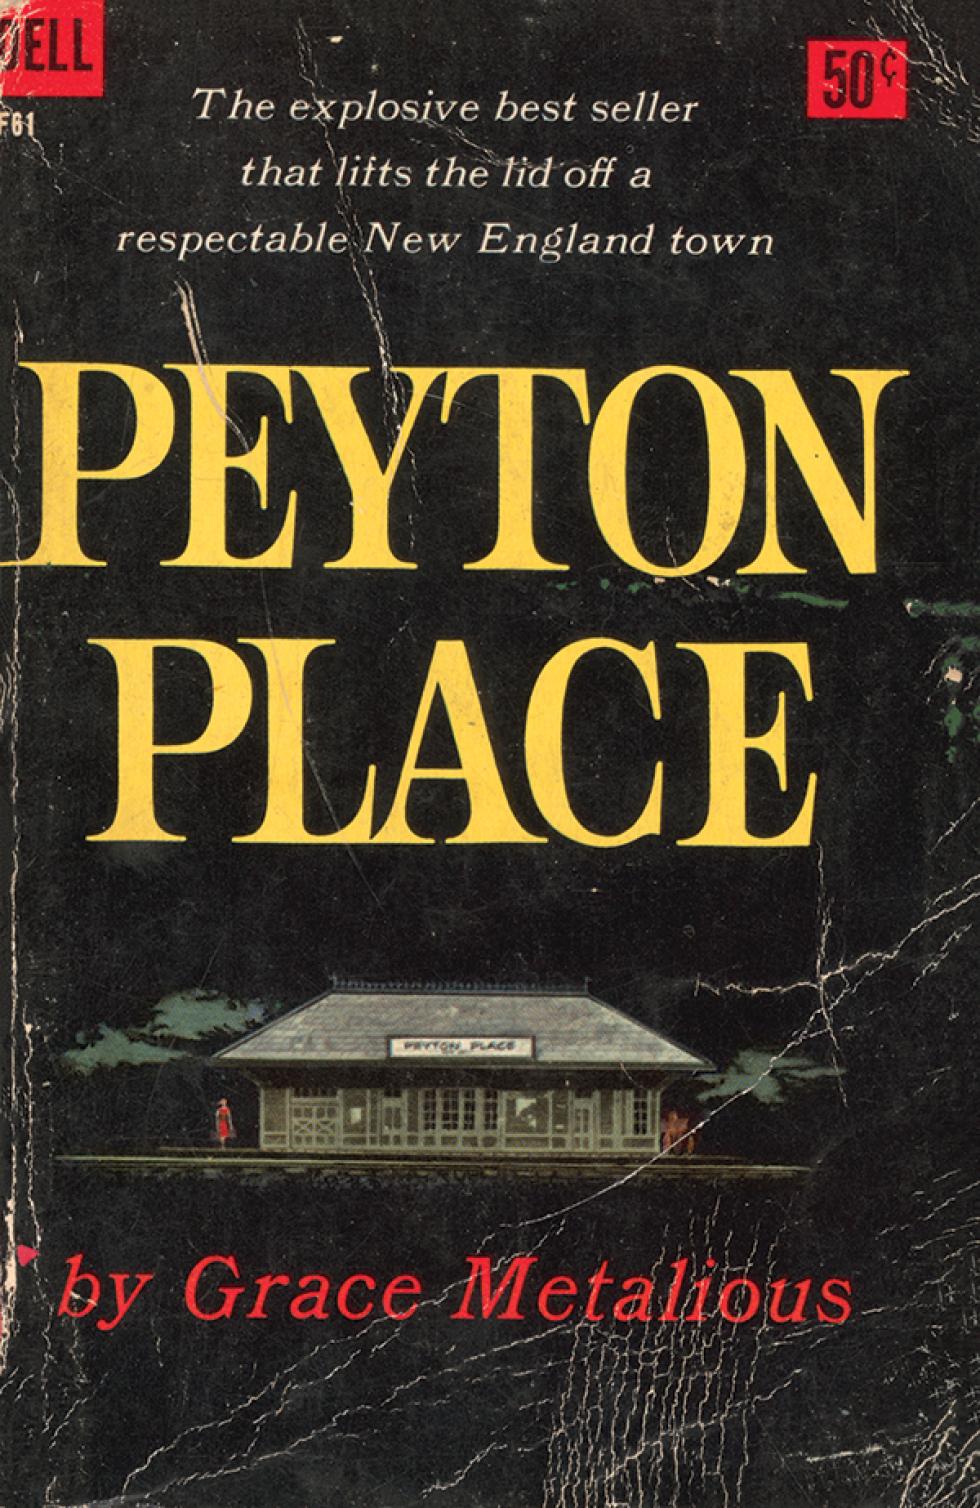 Paperback cover: The explosive best seller that lifts the lid off a respectable New England town, Peyton Place by Grace Metalious,